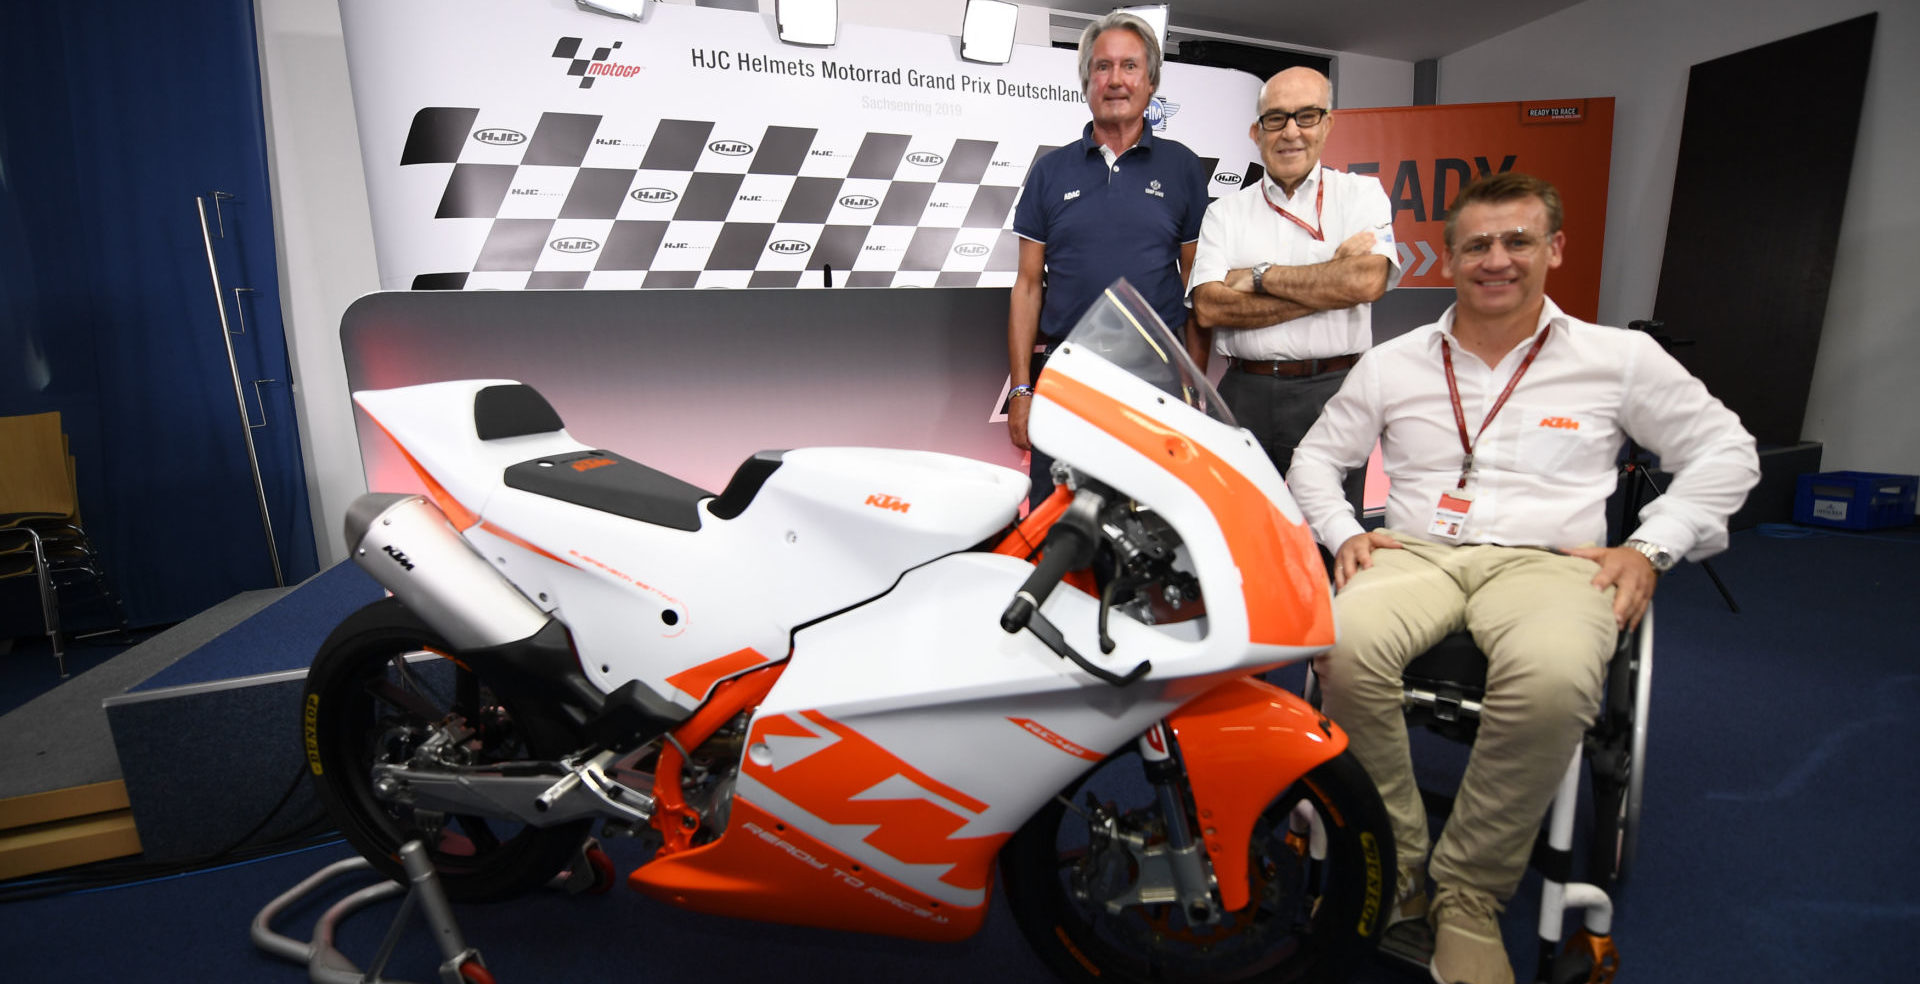 Herman Tomczyk, ADAC Sports President (left); Carmelo Ezpeleta, CEO of Dorna Sports (center); and Pit Beirer, KTM Motorsports Director (right), with a KTM RC4R racebike at the announcement of the Northern Talent Cup. Photo courtesy of Dorna.